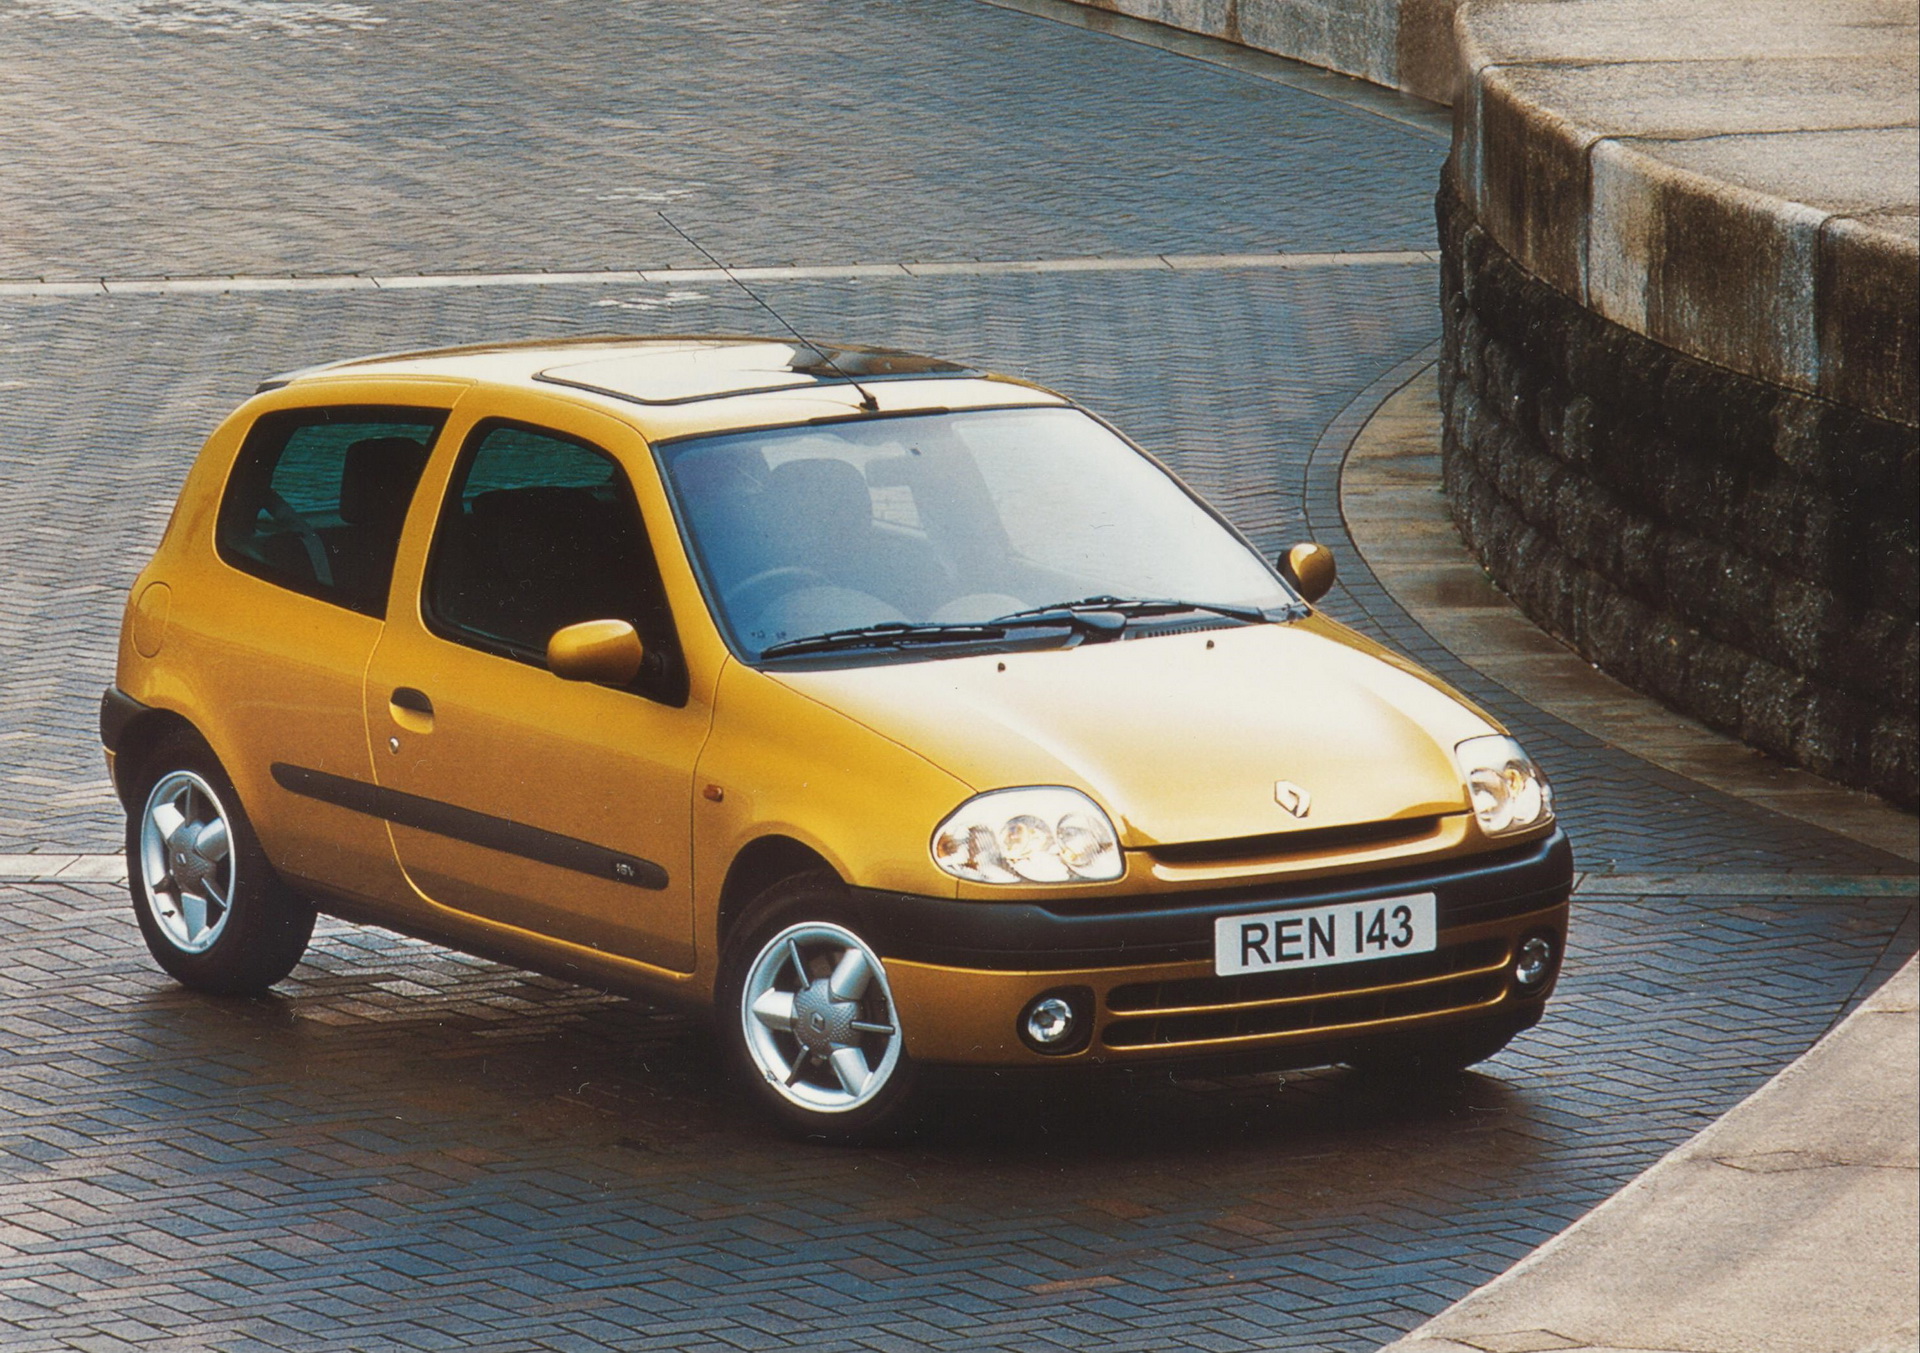 Maladroit tetraëder AIDS The Renault Clio Story: 30 Years Of The Popular French Supermini | Carscoops